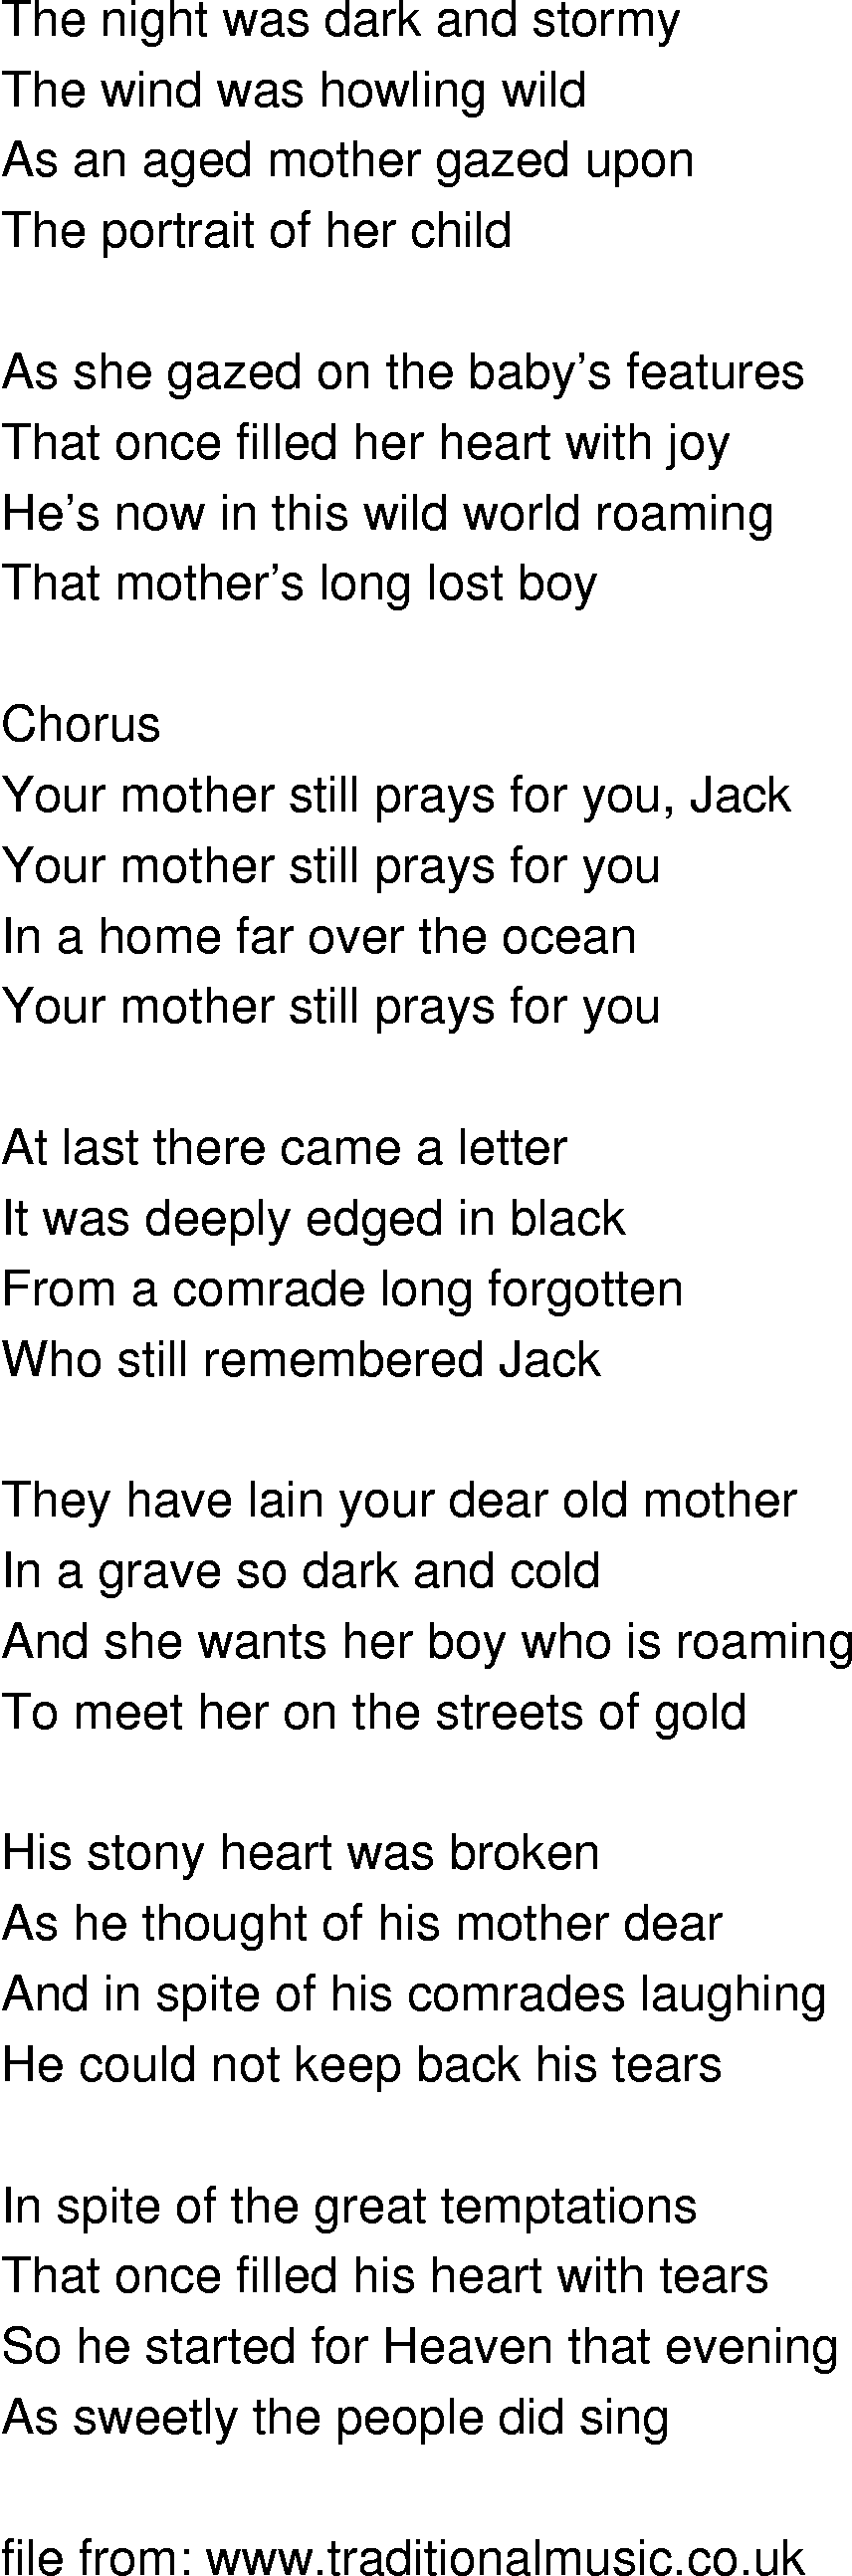 Old-Time (oldtimey) Song Lyrics - your mother still prays for you